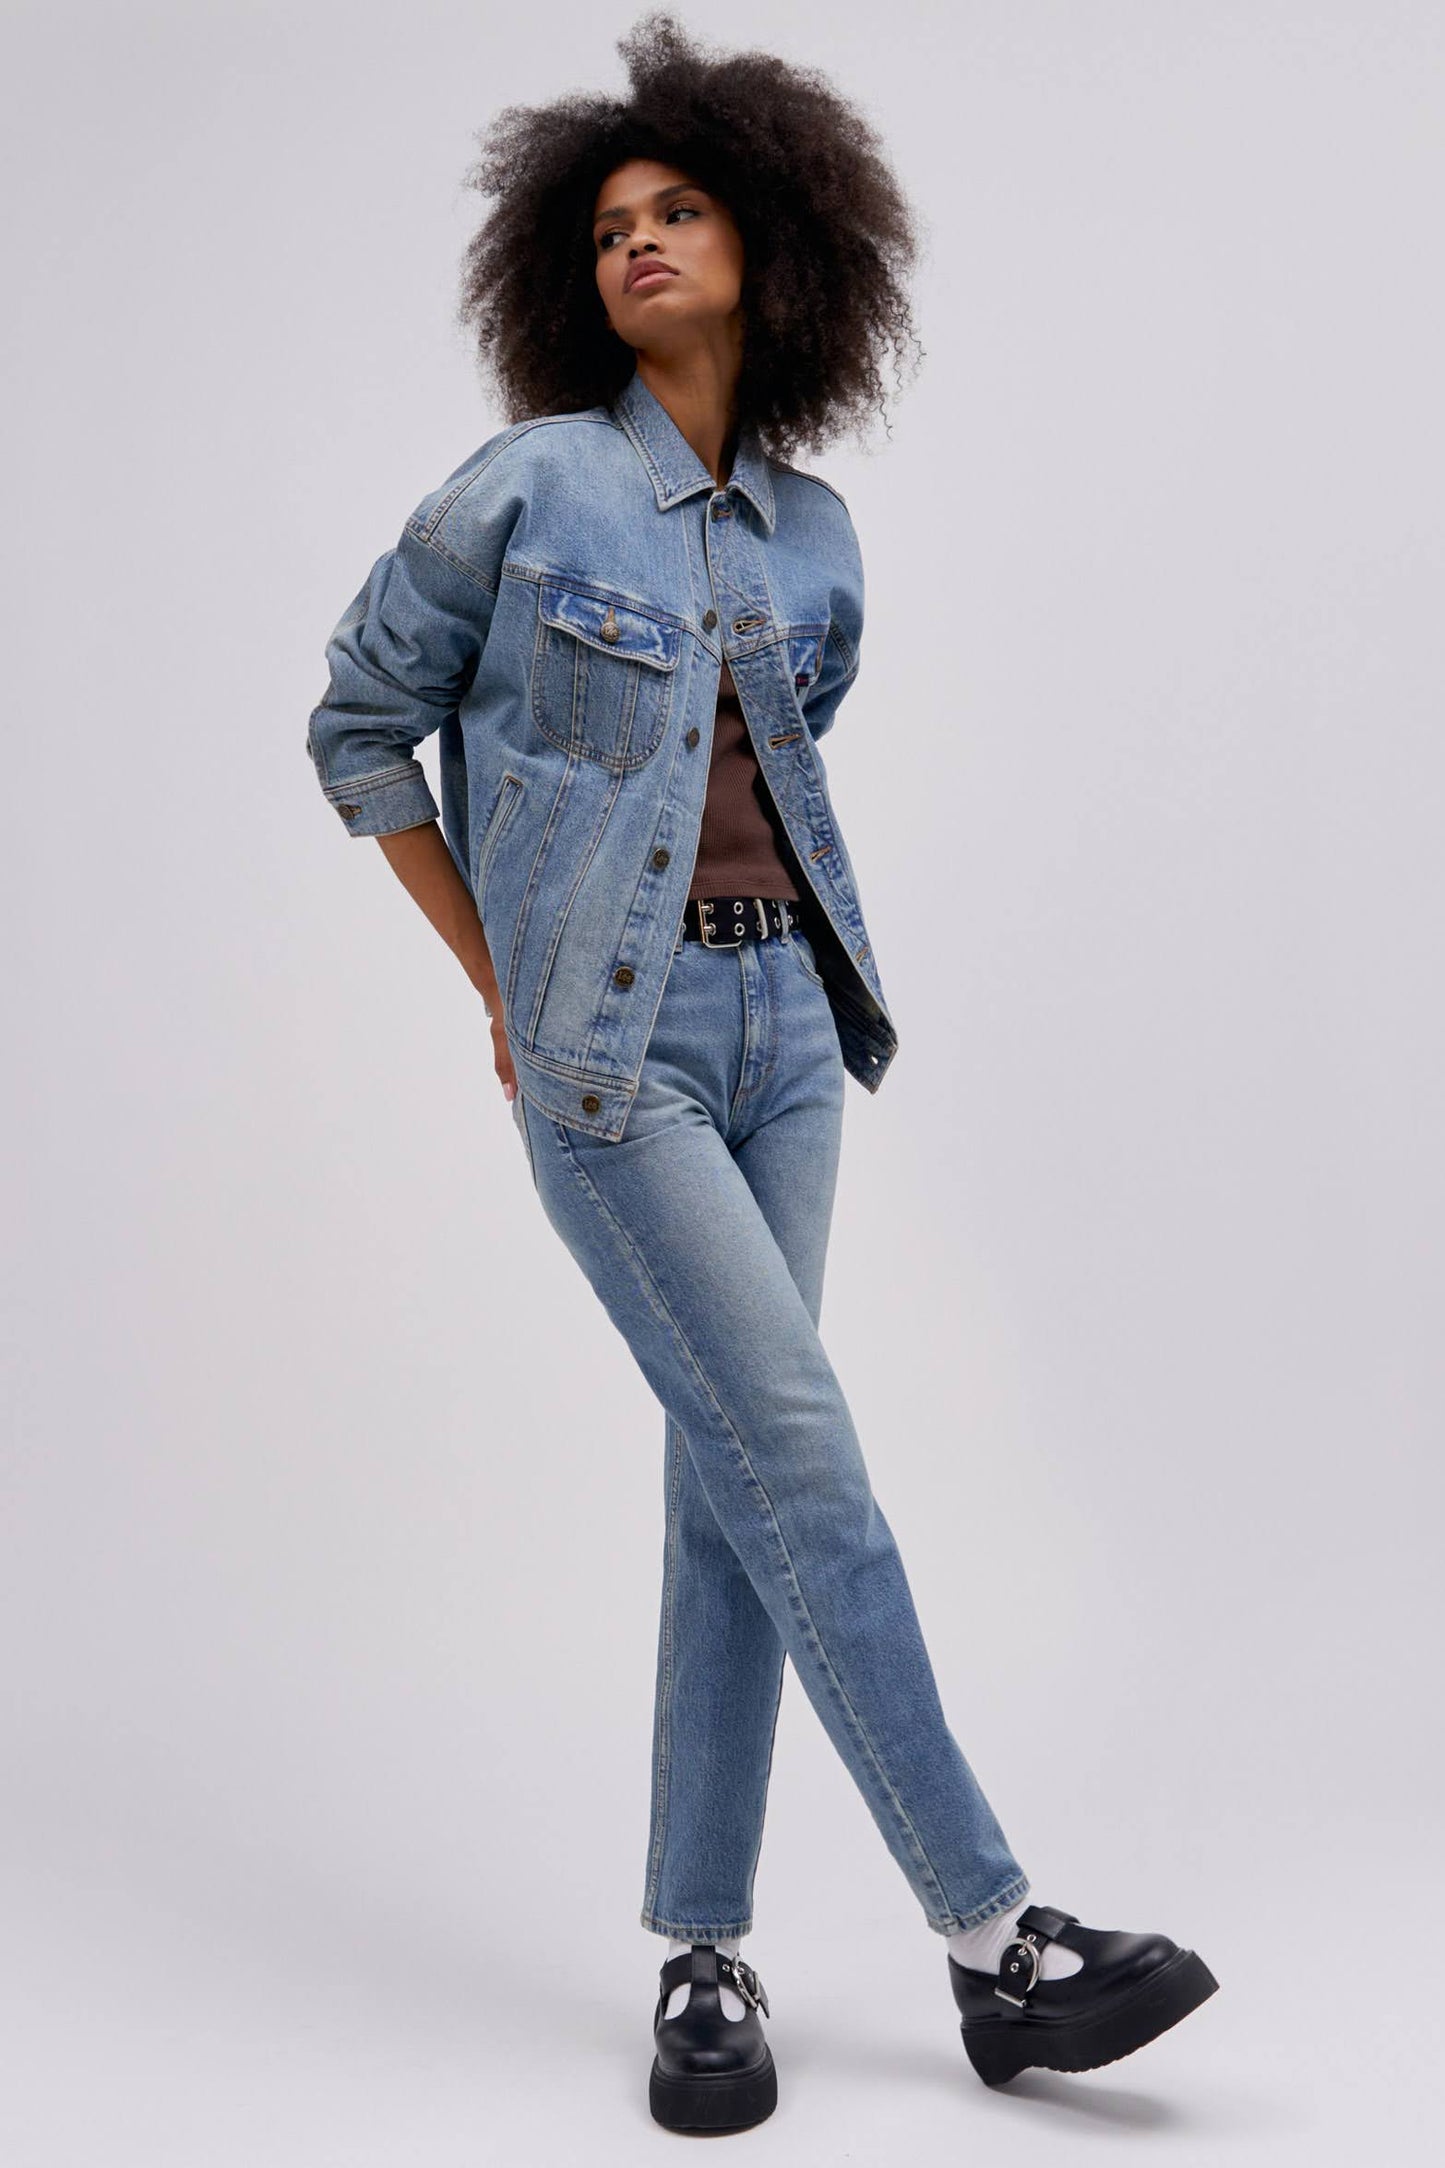 Curly haired model posing and wearing a reimagined Lee Denim rider jacket in an oversized fit.